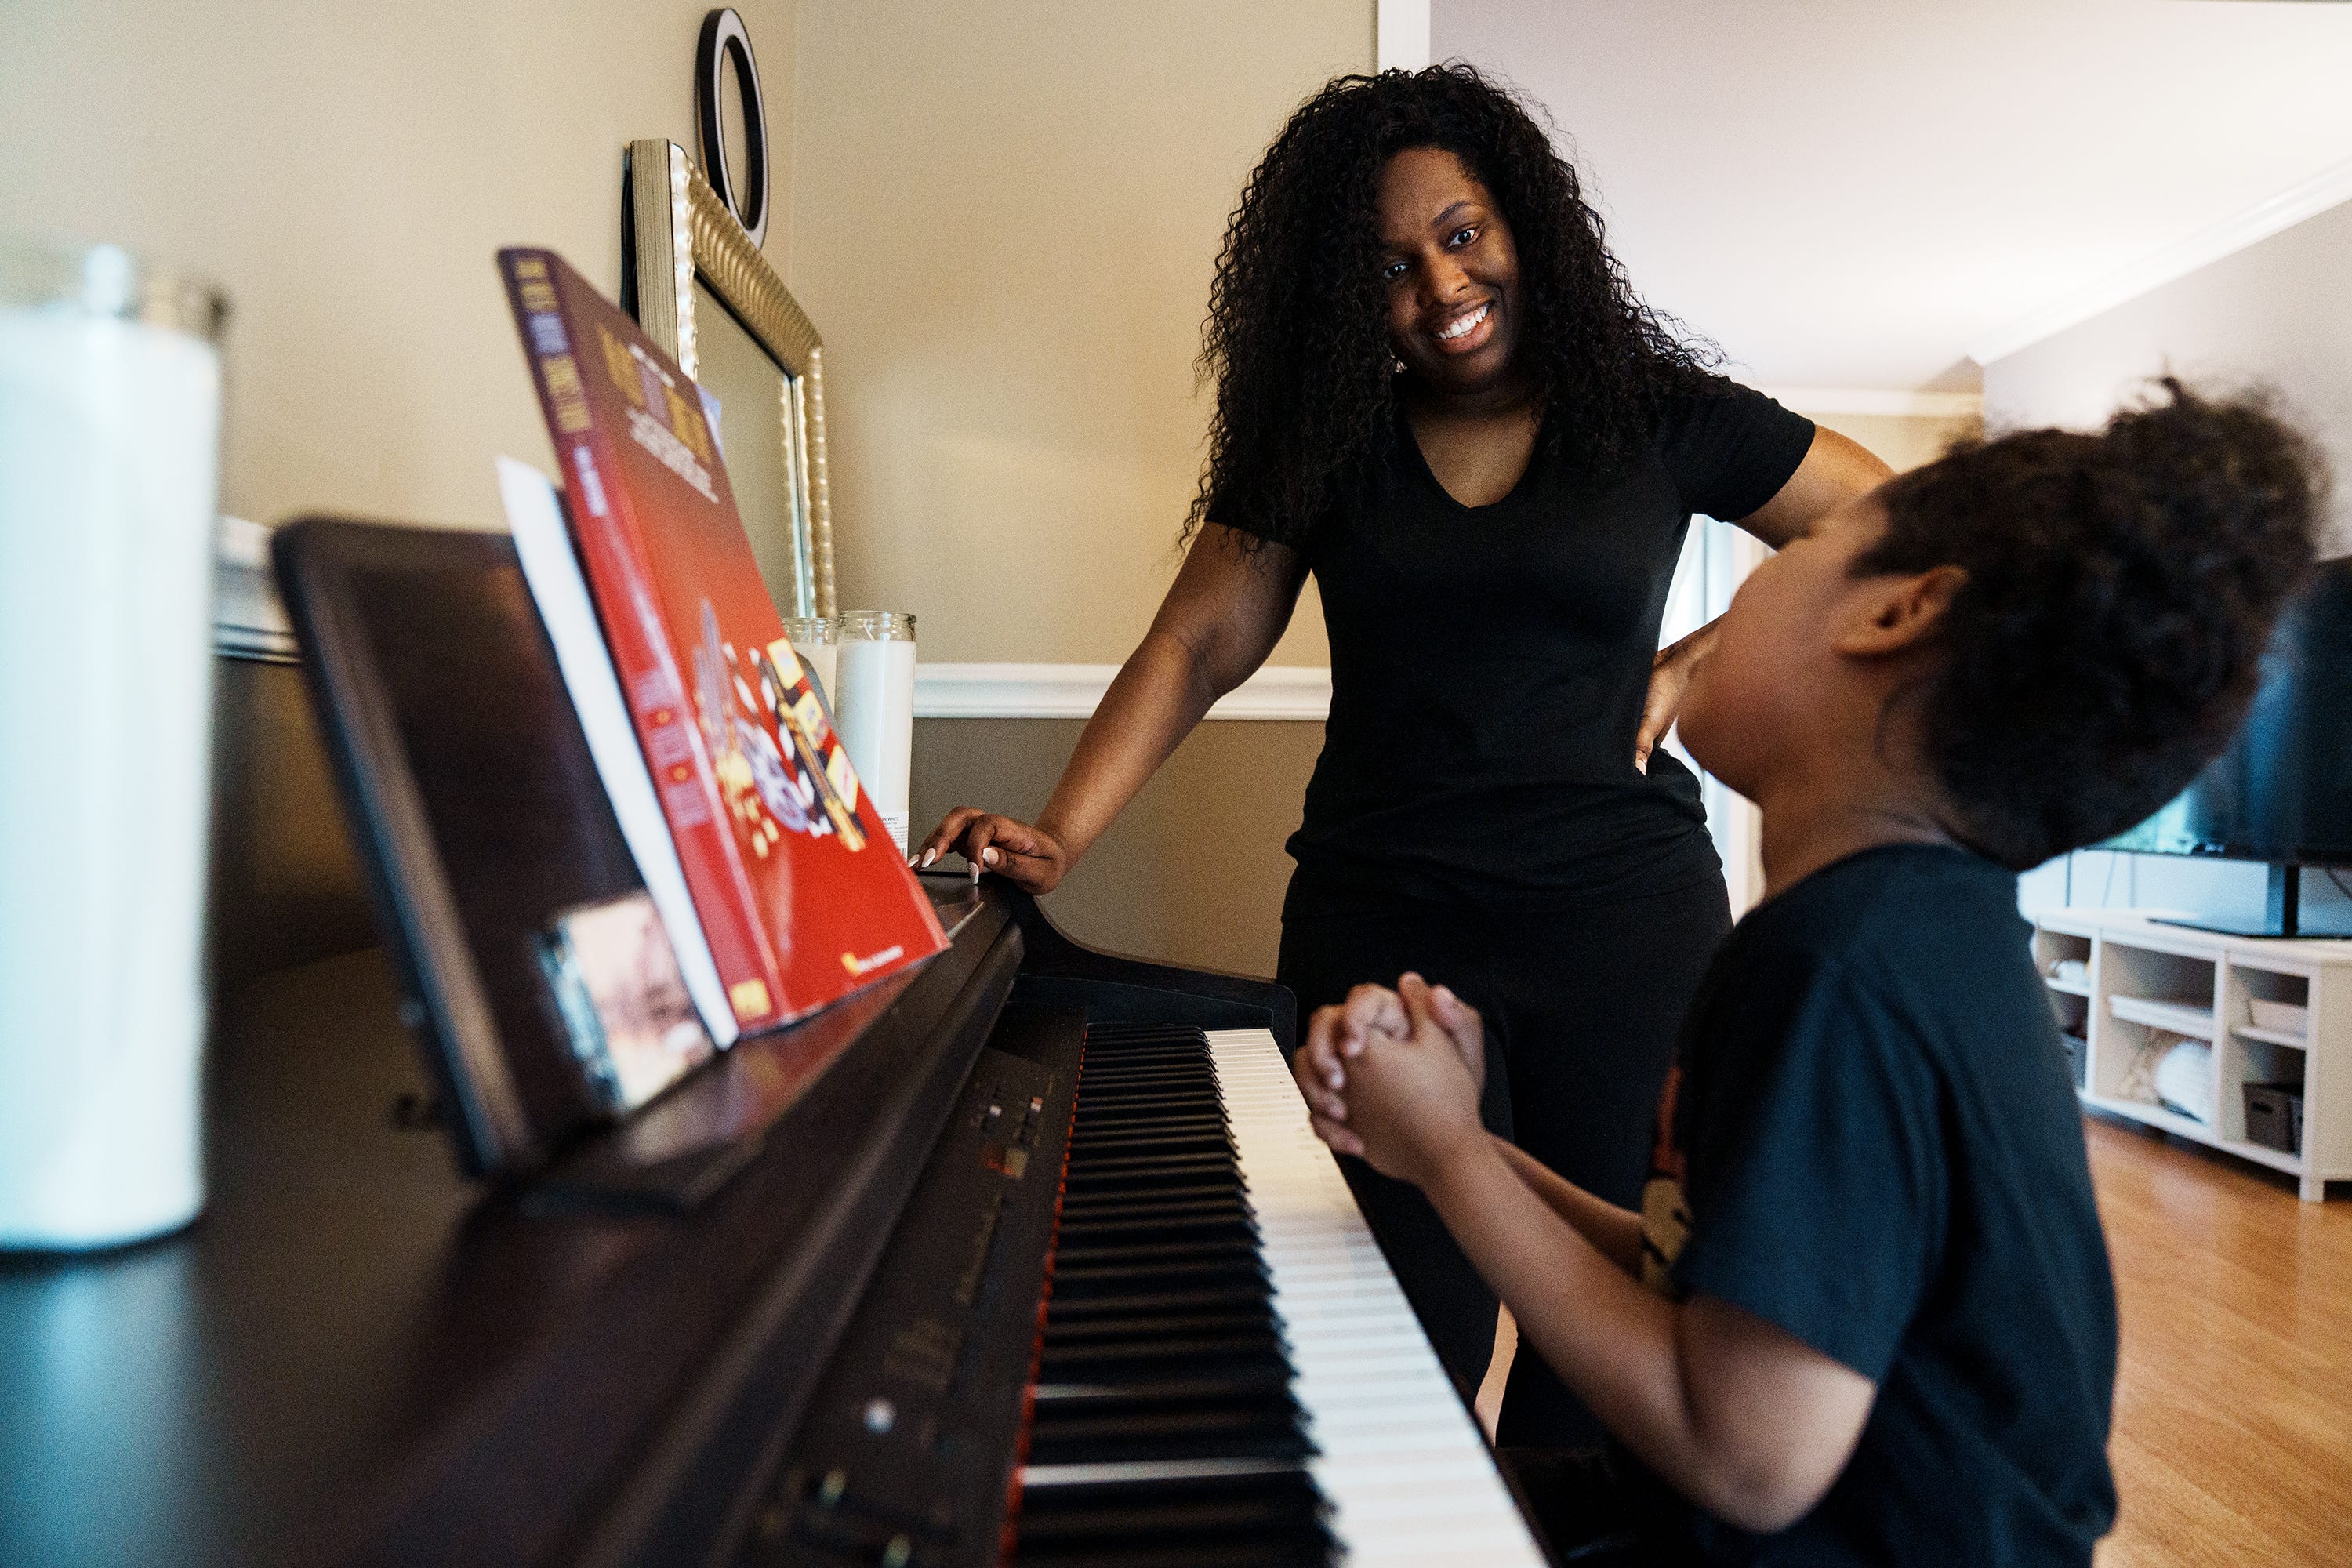 Cynthia Adinig listens as her son Aiden explains piano playing techniques at their Vienna, Virginia, home on Sept. 7.